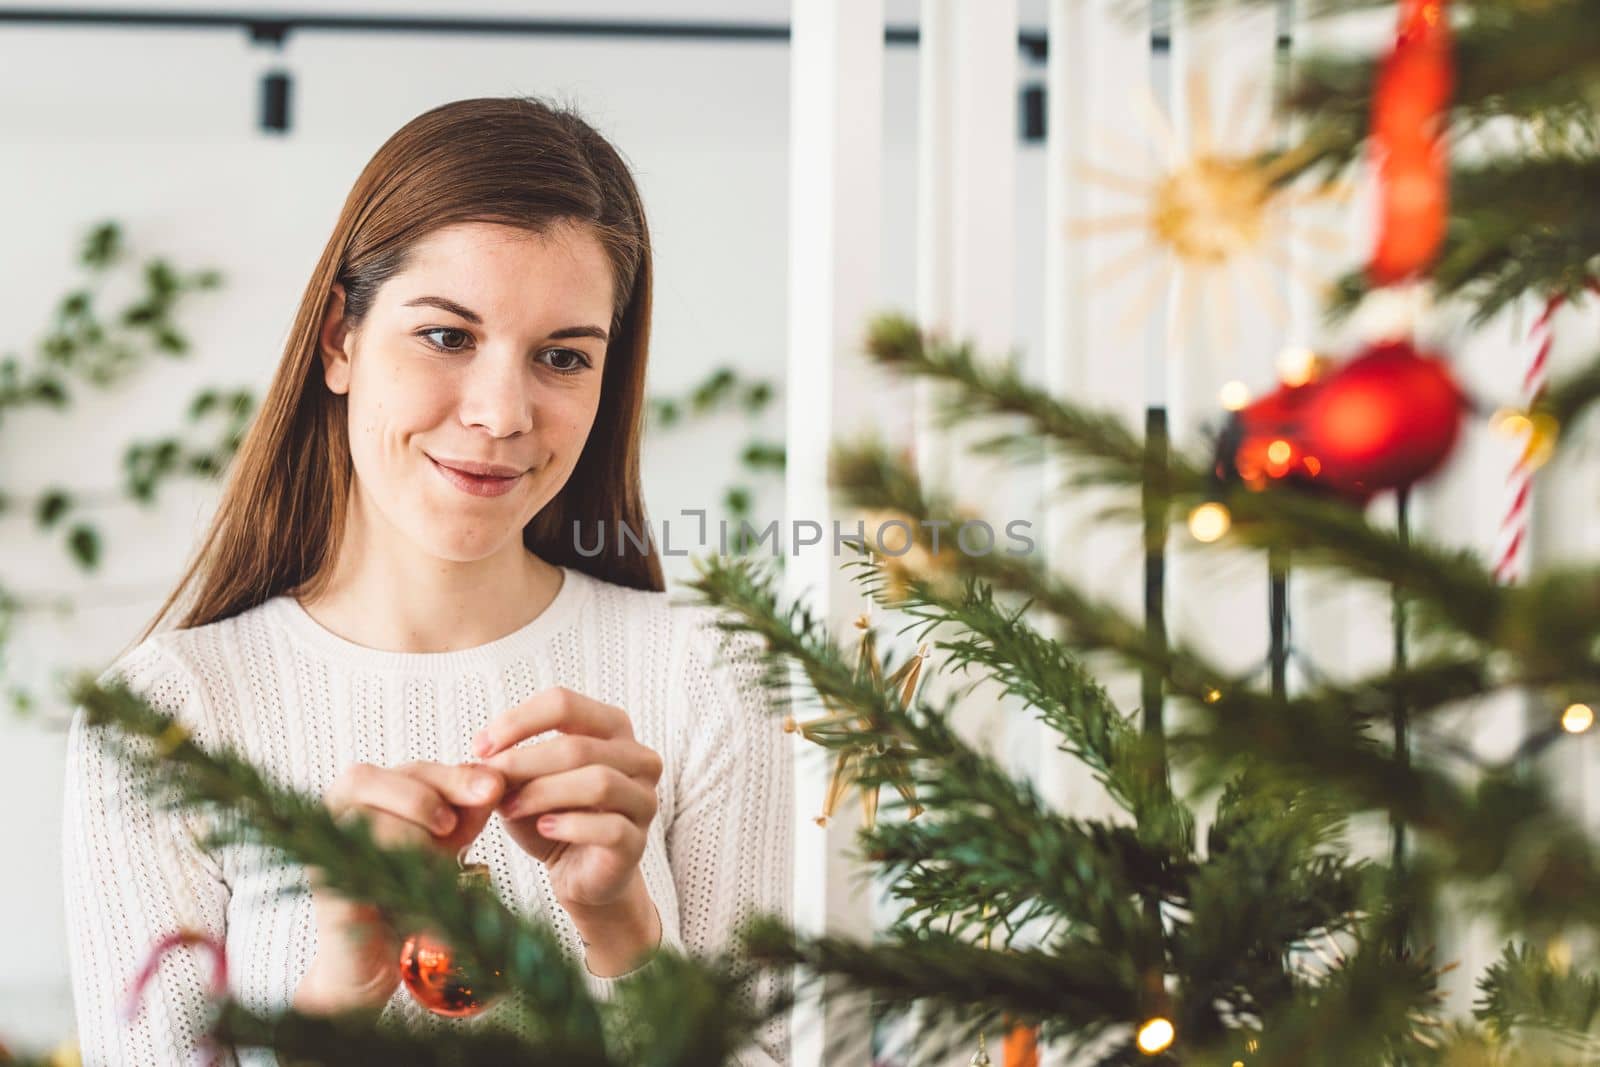 Beautiful smiling cheerful caucasian woman dressed in white outfit decorating a natural Christmas tree, putting red ornaments on the tree, holding a red Christmas ornament.